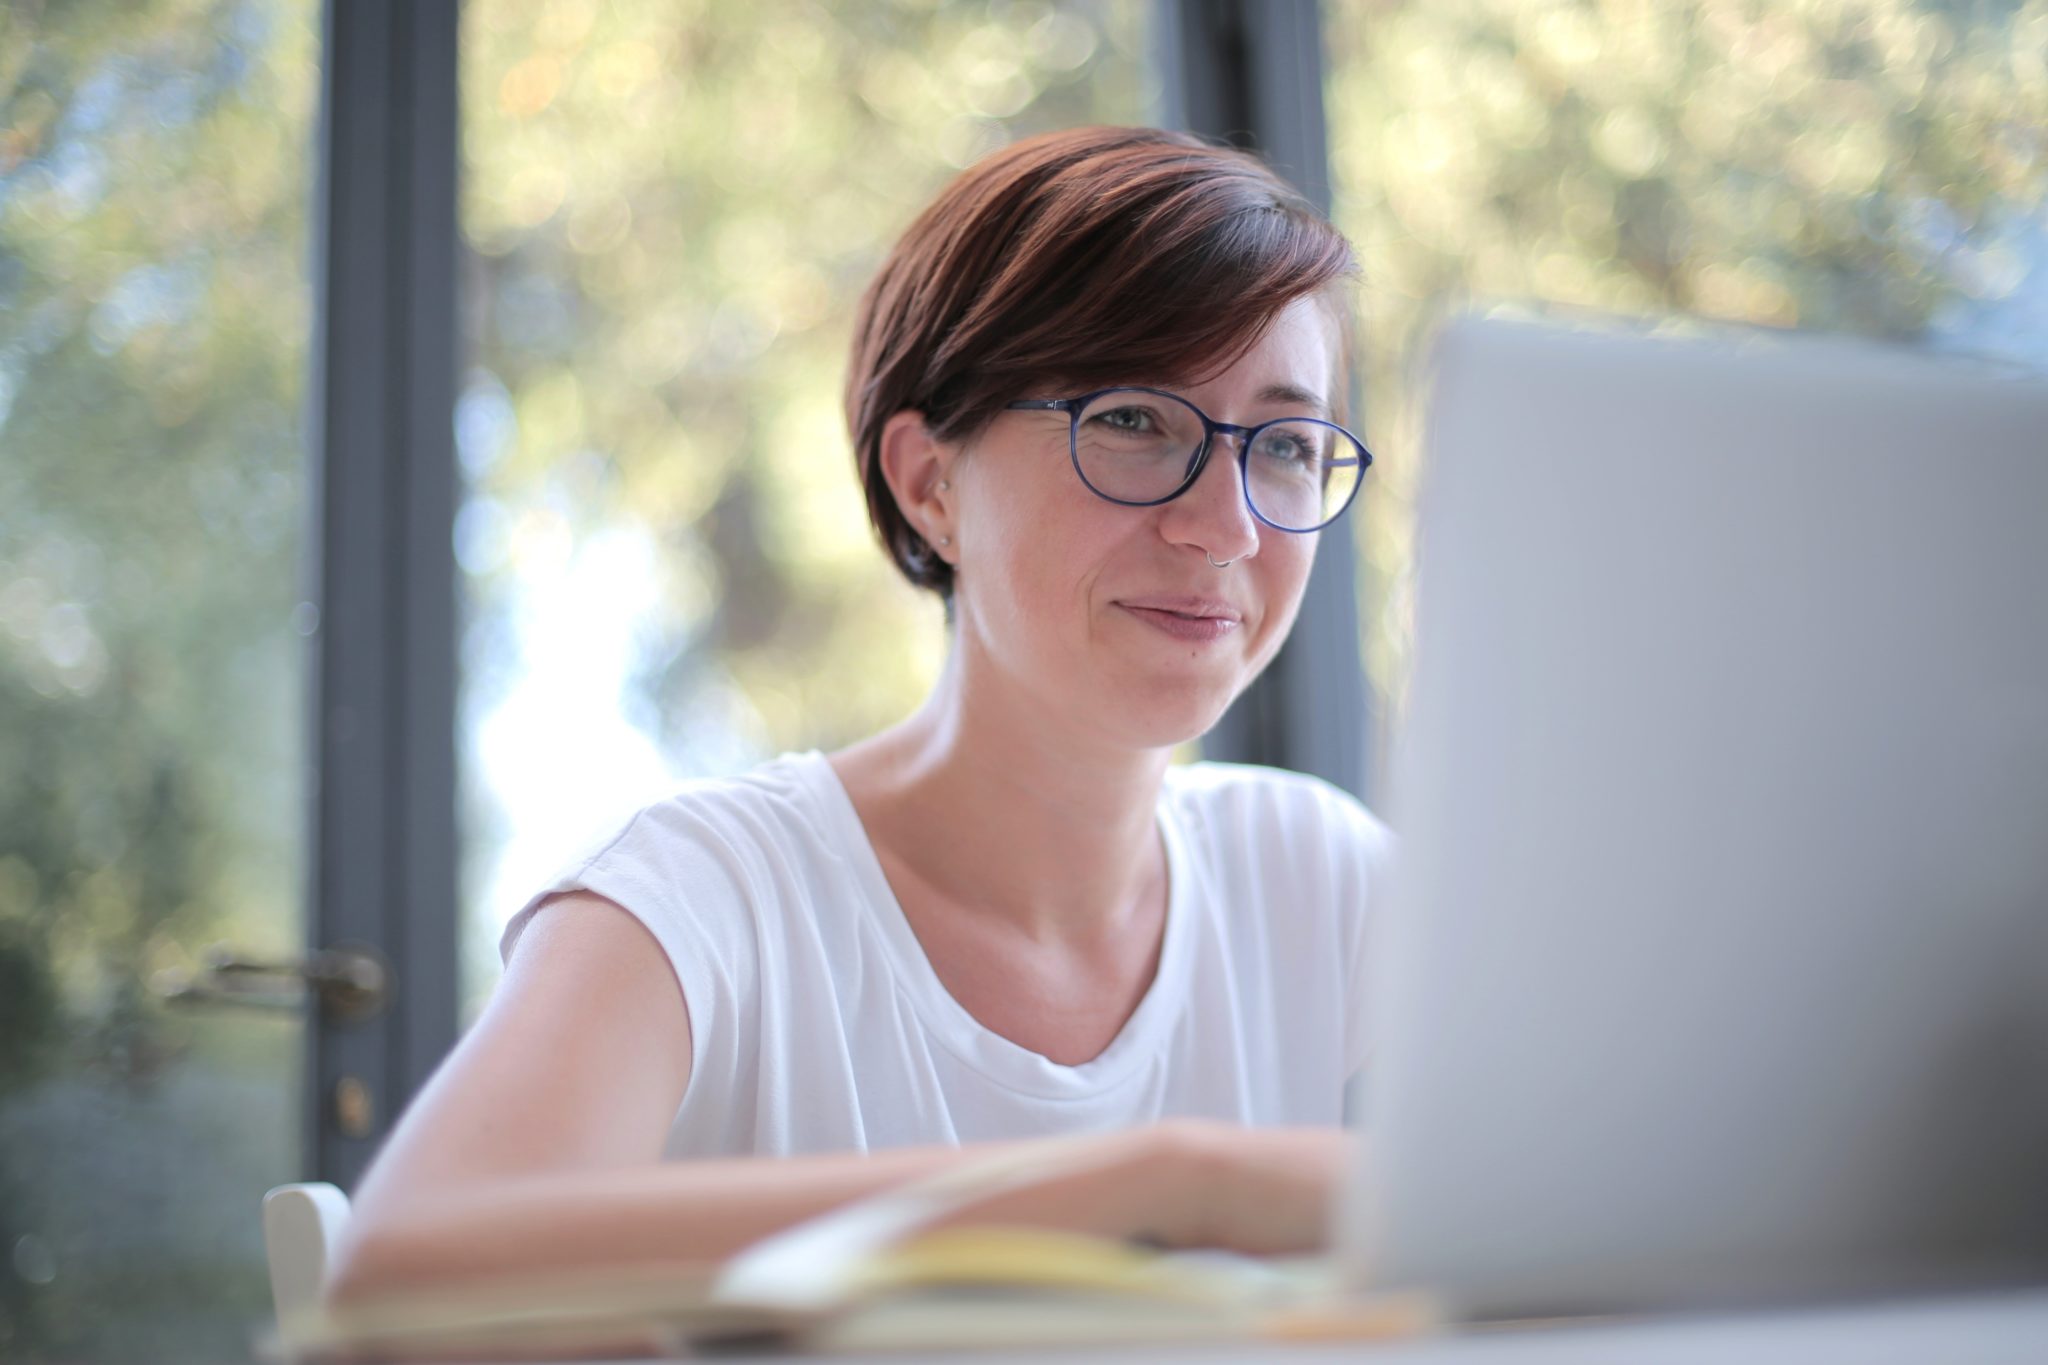 Image of a white woman in a white shirt working on a laptop